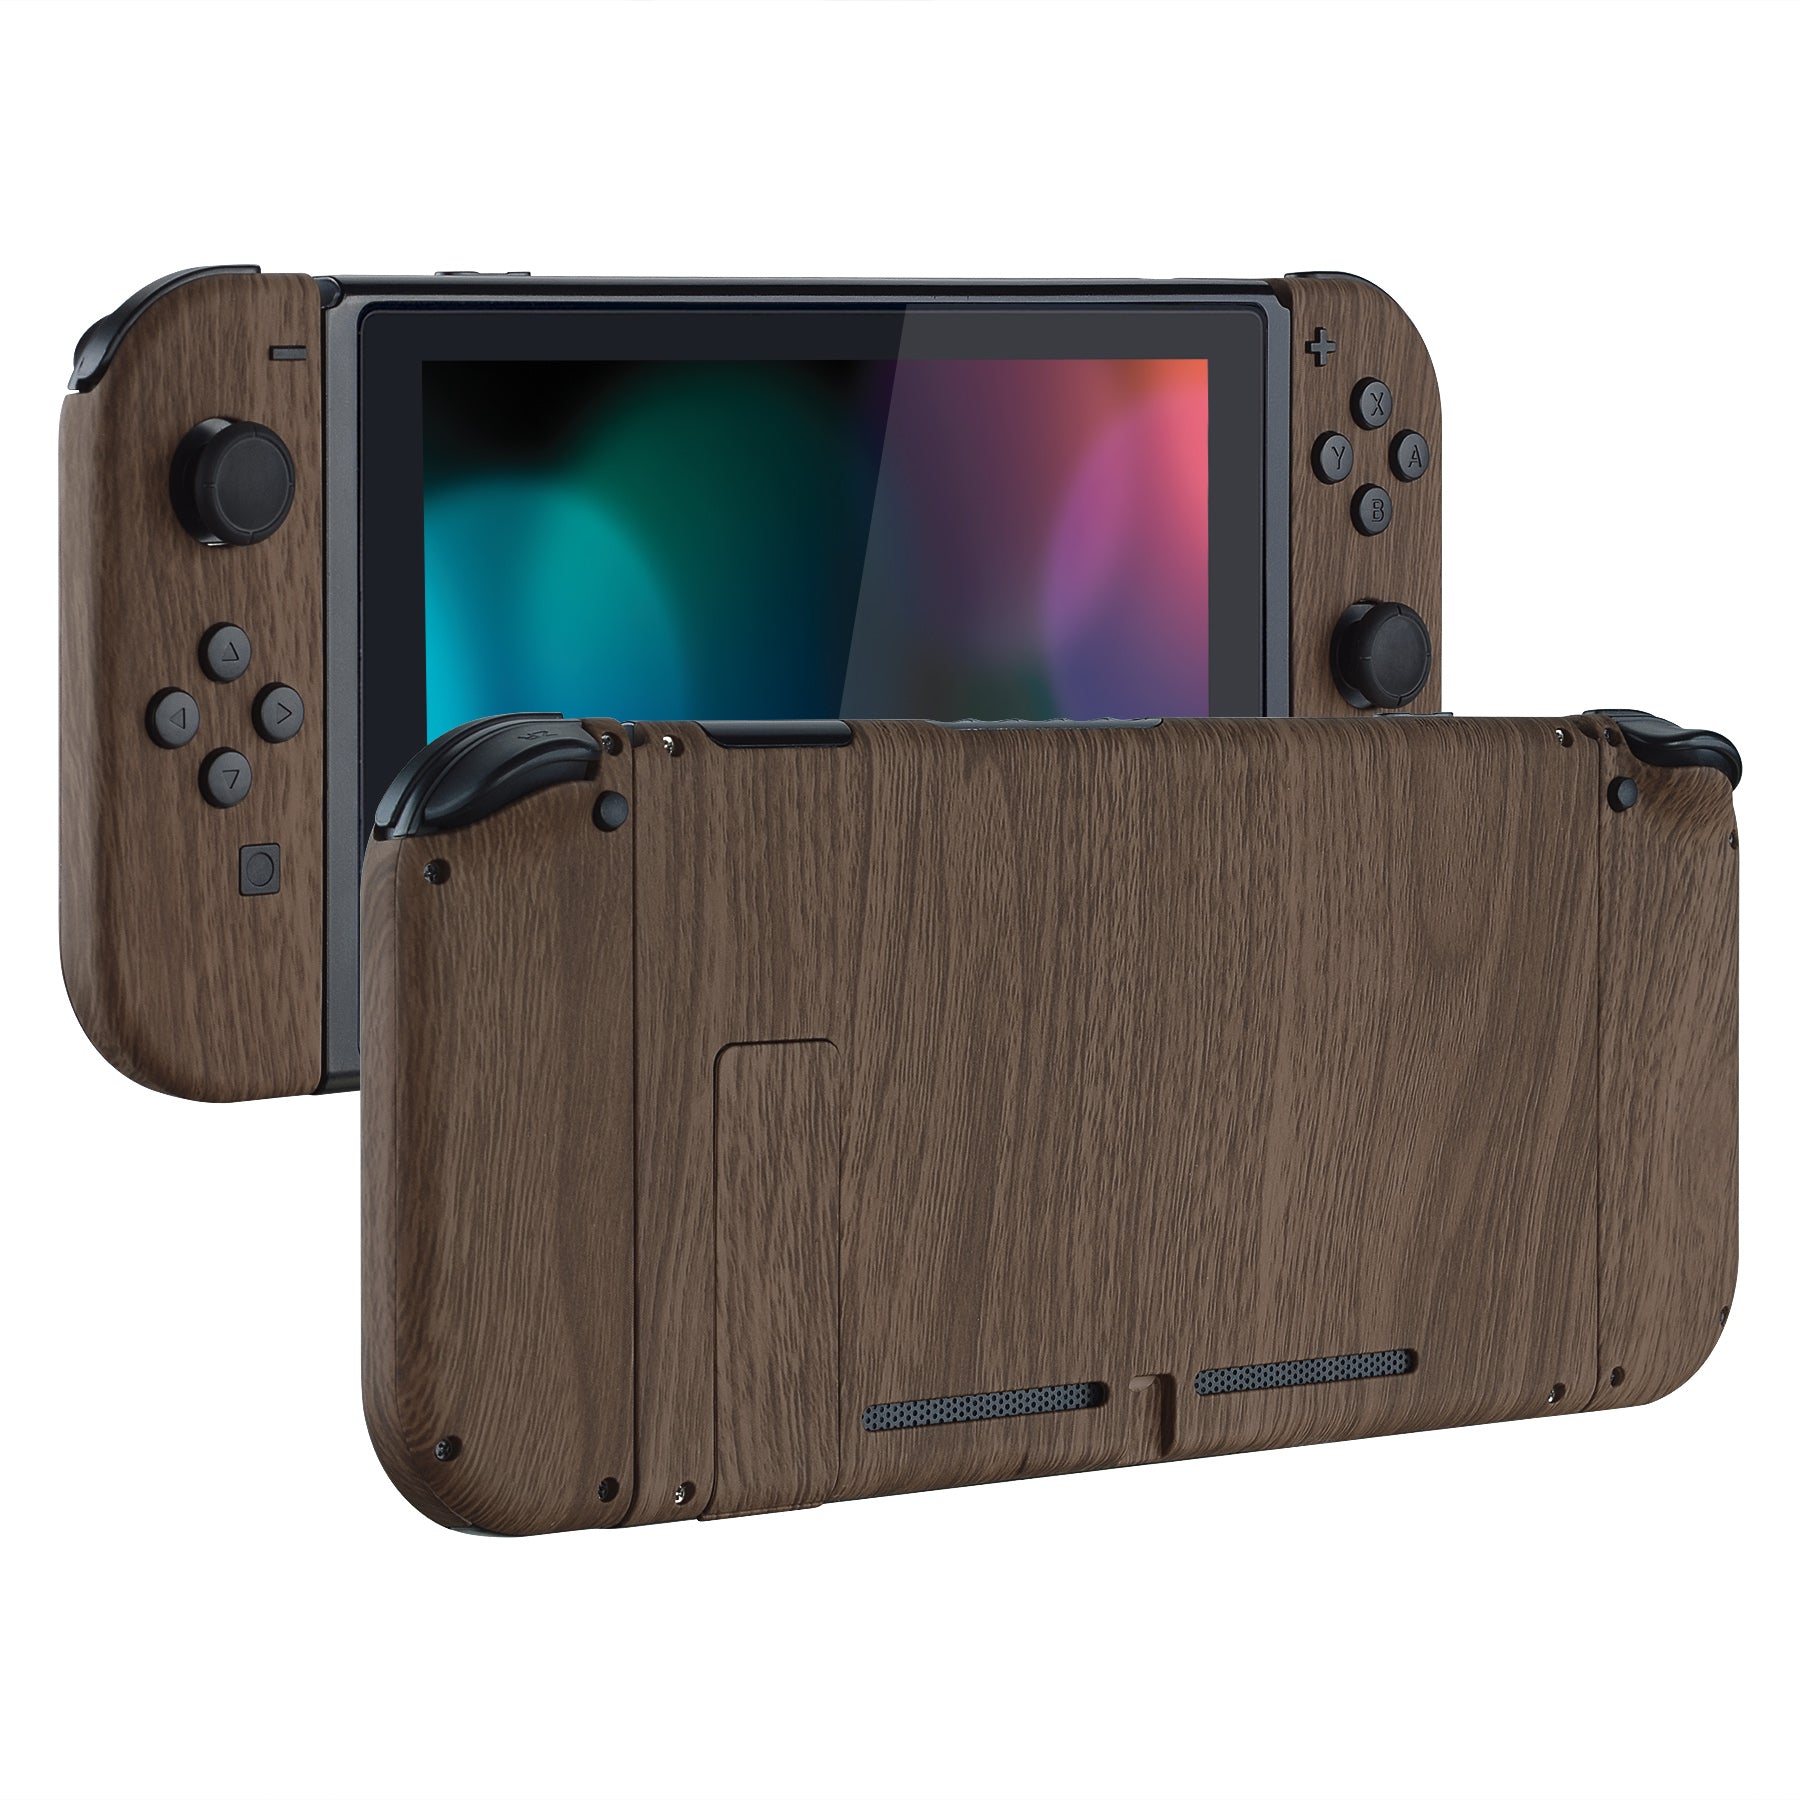 eXtremeRate Soft Touch Grip Back Plate for Nintendo Switch Console